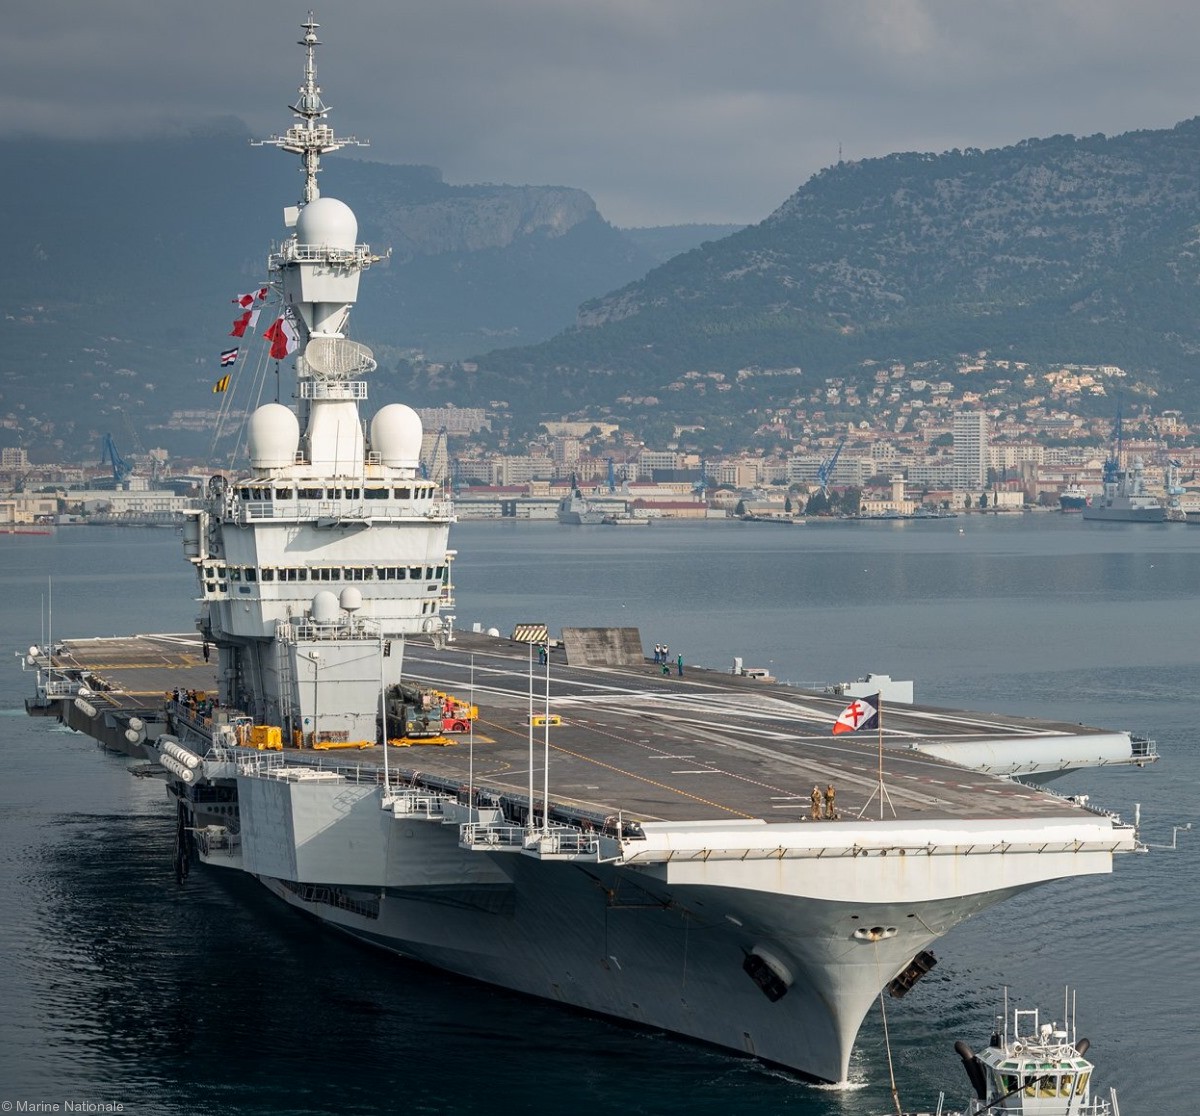 r-91 fs charles de gaulle aircraft carrier french navy marine nationale 67